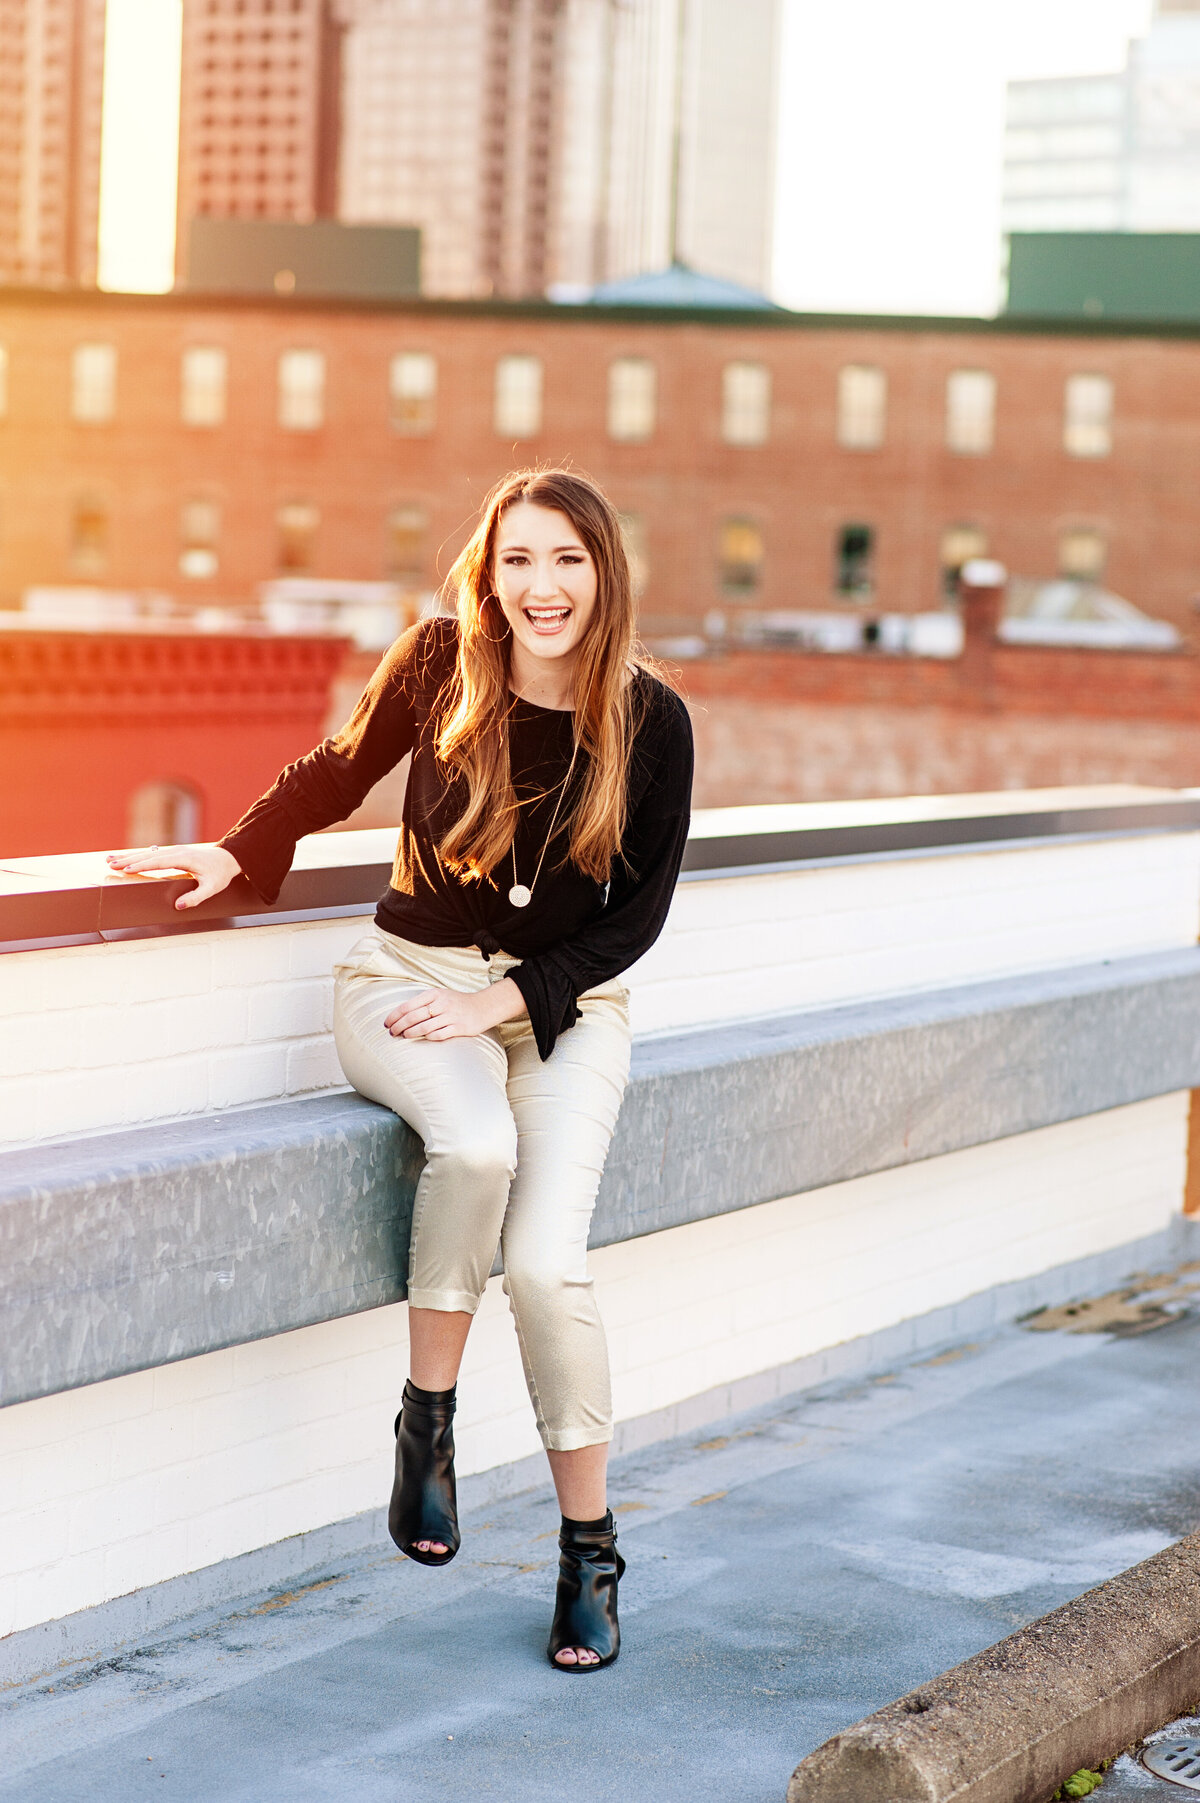 RVA senior girl poses on rooftop during her senior portrait session at sunset wearing gold pants.